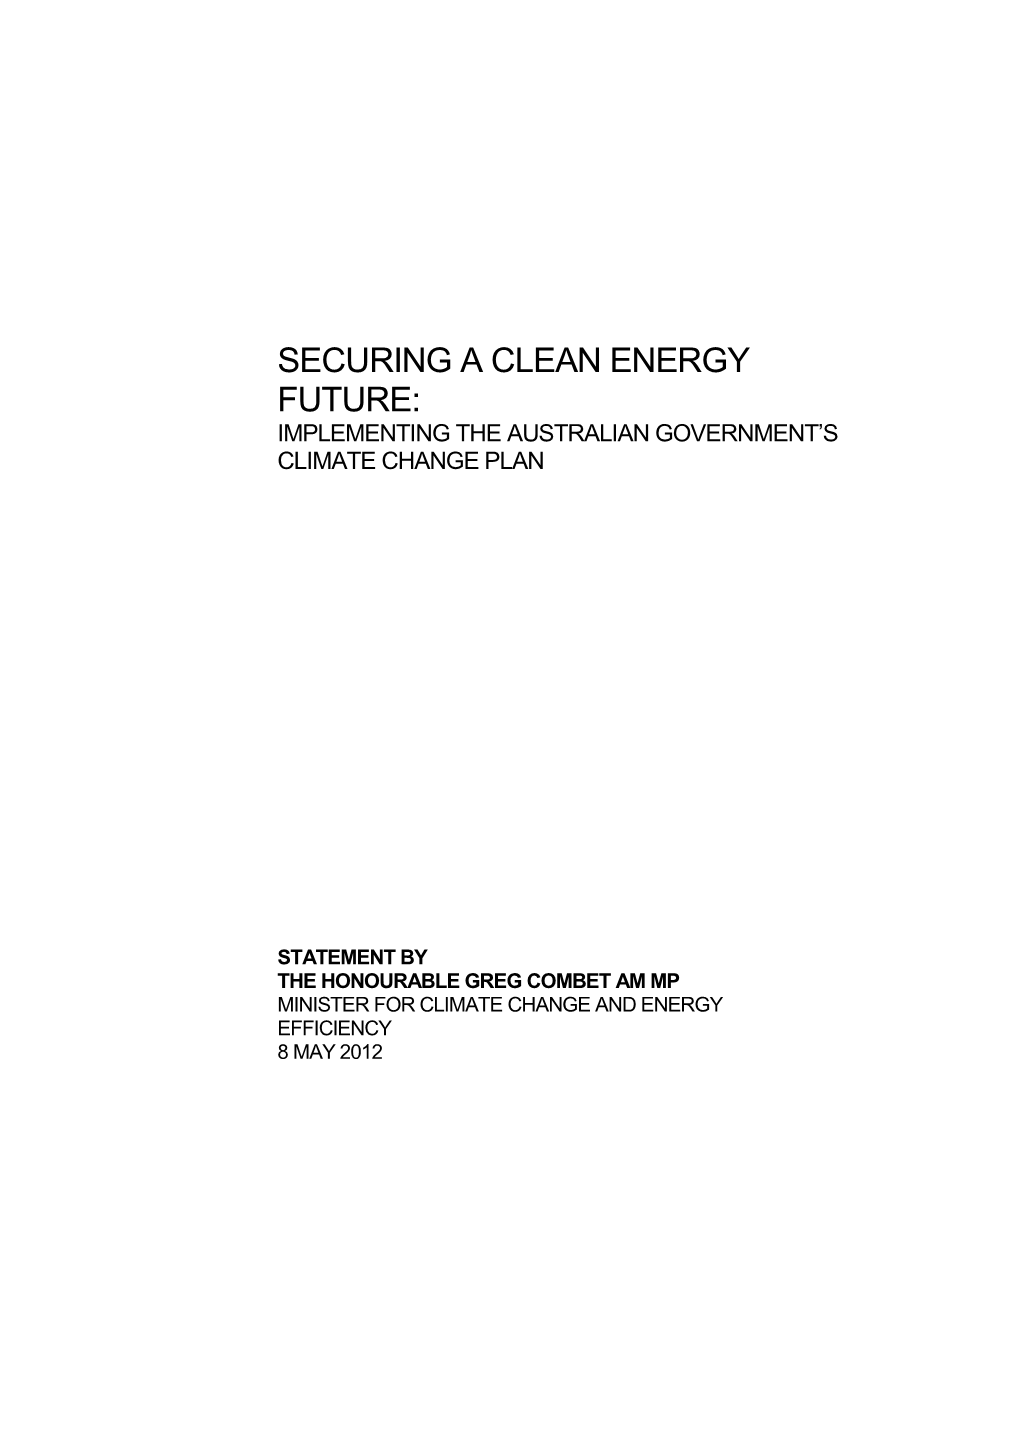 Securing a Clean Energy Future: Implementing the Australian Government’S Climate Change Plan